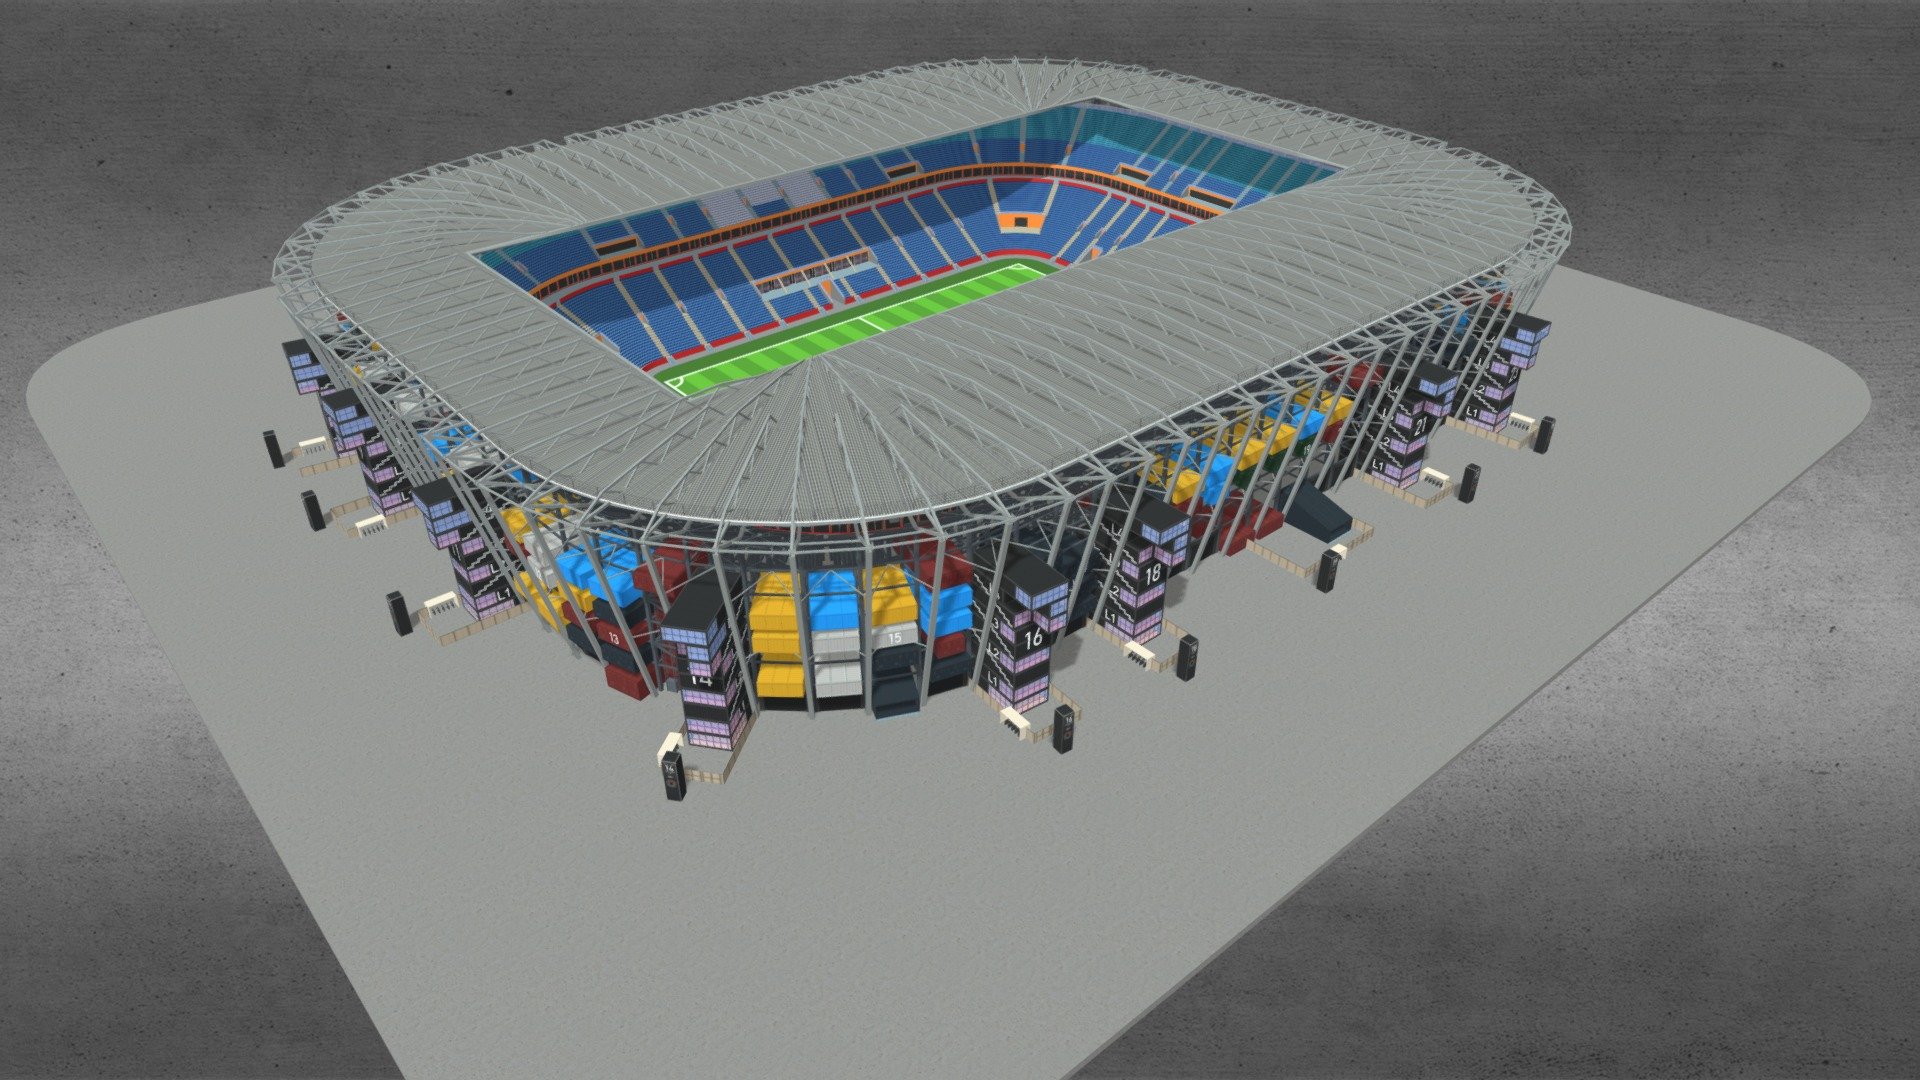 Stadium 974 Qatar
Originally created with 3ds Max 2015 and rendered in V-Ray 3.0

Total Poly Counts:
Poly Count = 327216
Vertex Count = 433173
Textures Formats:
- (2 .jpg) 4096 x 4096
- (3 .jpg) 2048 x 2048

Visit This 3d Model
https://nuralam3d.blogspot.com/2022/04/stadium-974-qatar.html - Stadium 974 Qatar - 3D model by nuralam018 3d model